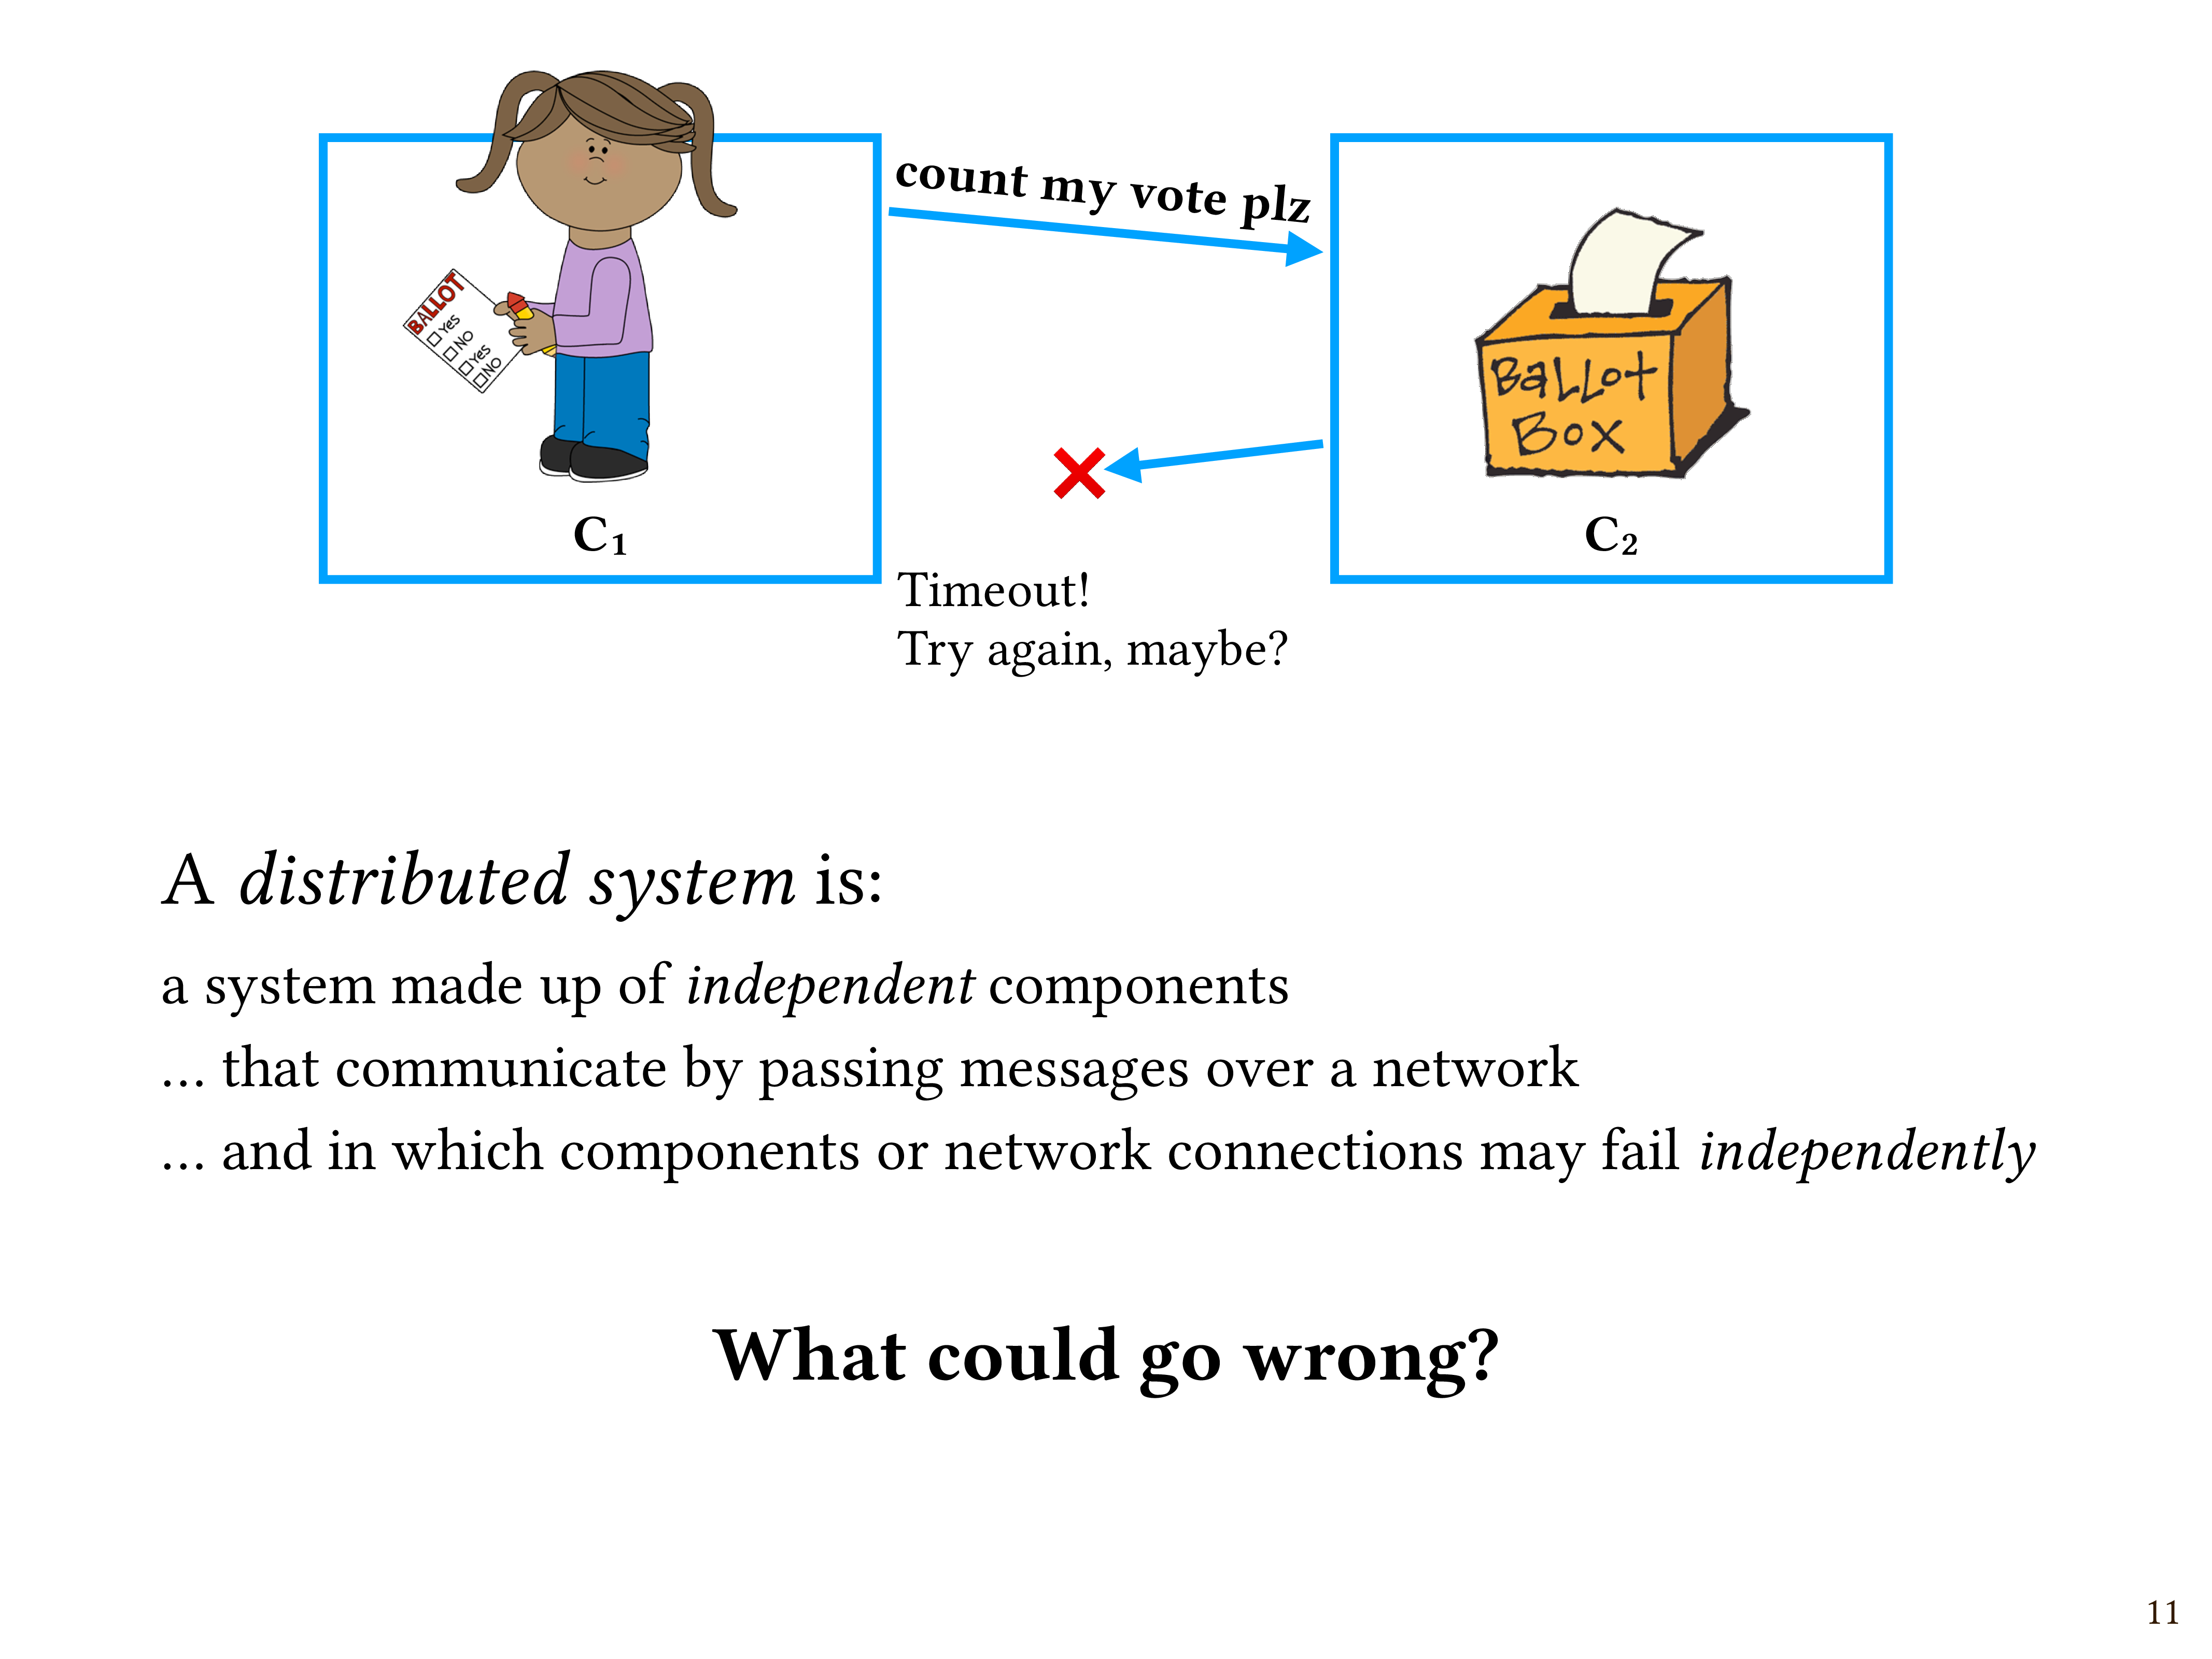 A diagram showing a failed (or is it?) voting attempt.  A voter submits a vote, but her request doesn't receive an acknowledgment and times out, so she doesn't know whether or not the vote was counted.